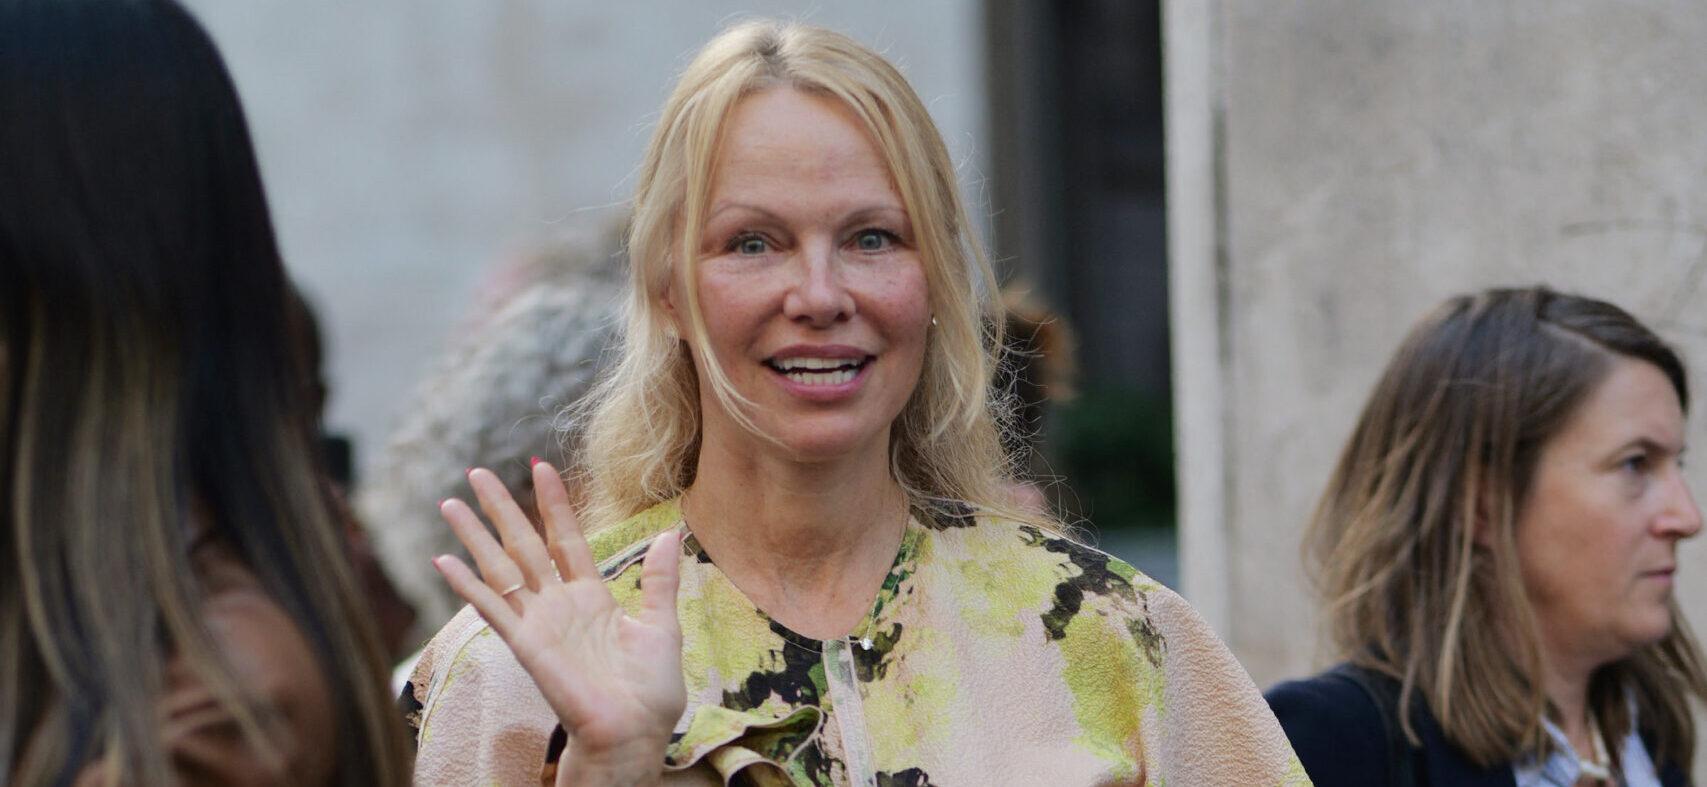 Pamela Anderson Praised For ‘Embracing The Natural’ With Another Makeup Free Appearance